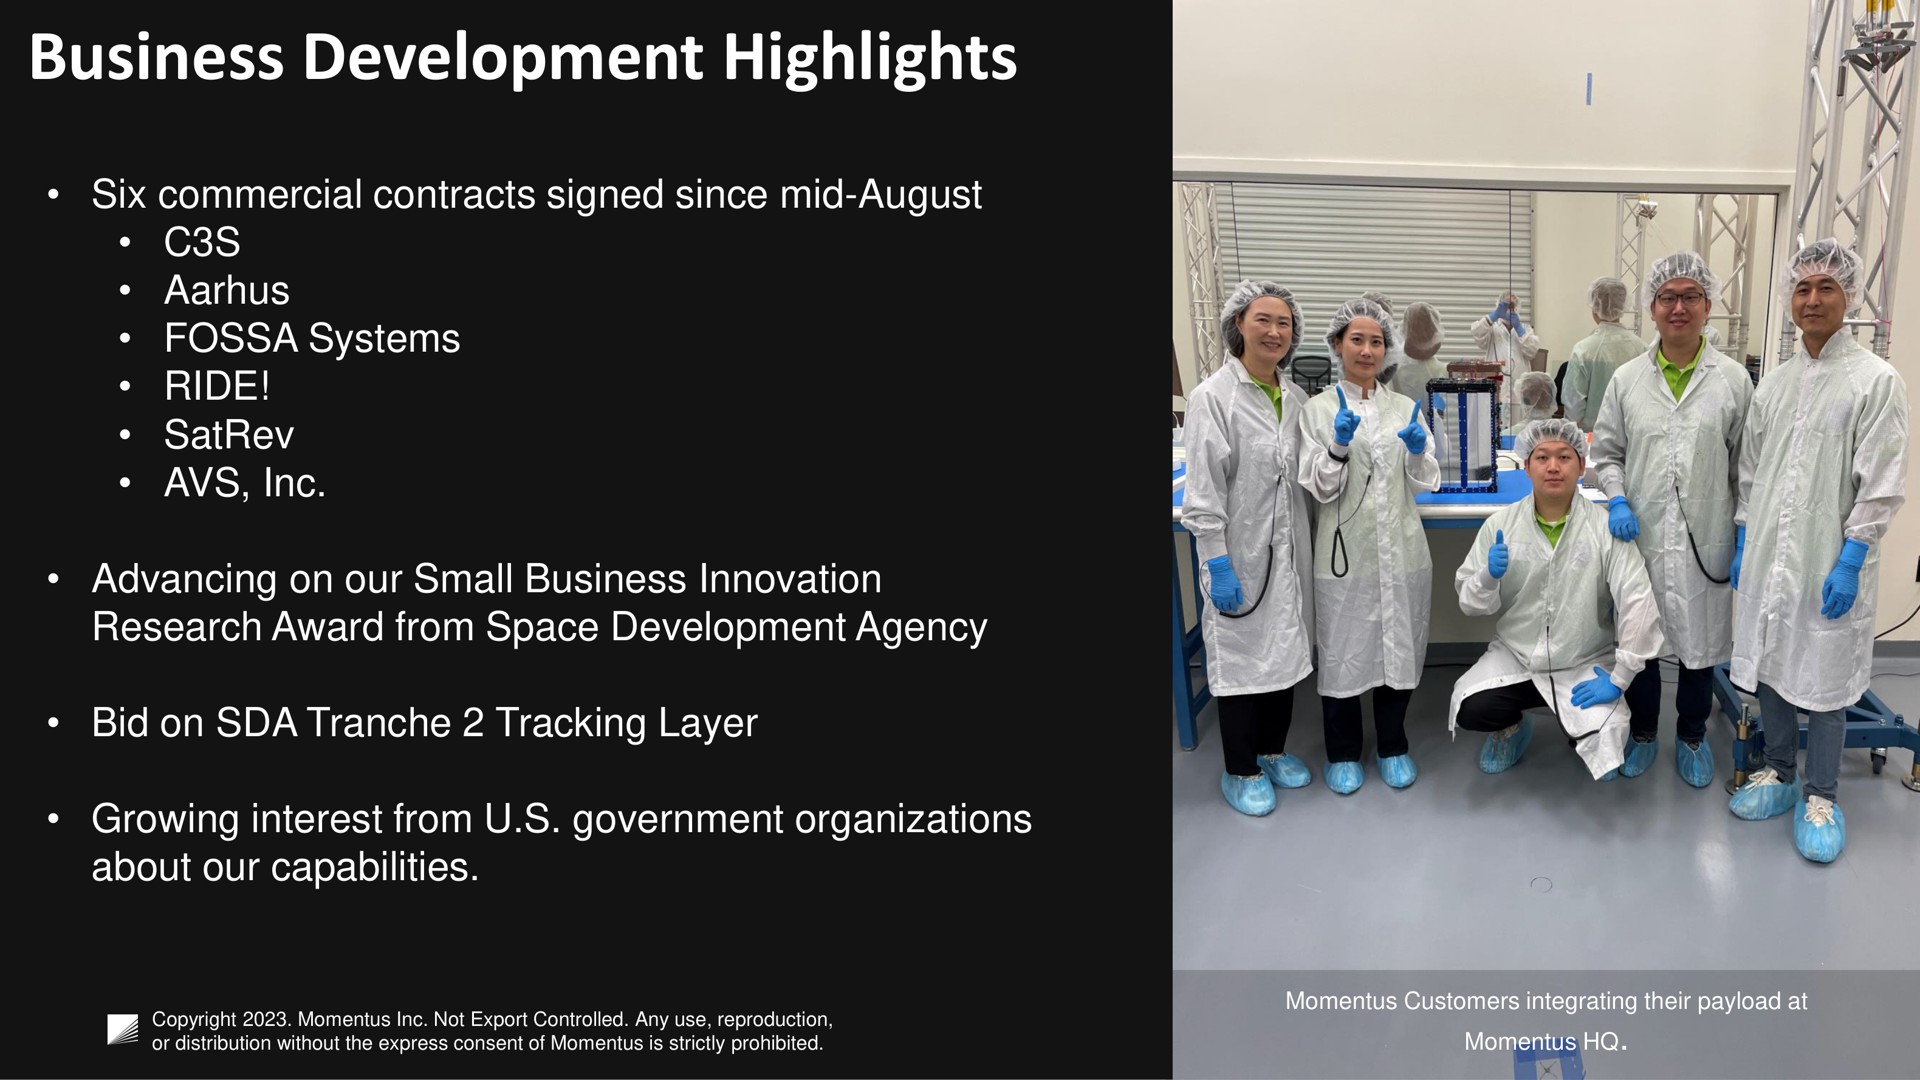 business development highlights six commercial contracts signed since mid august fossa systems ride advancing on our small business innovation research award from space development agency bid on tracking layer growing interest from government organizations about our capabilities | Momentus